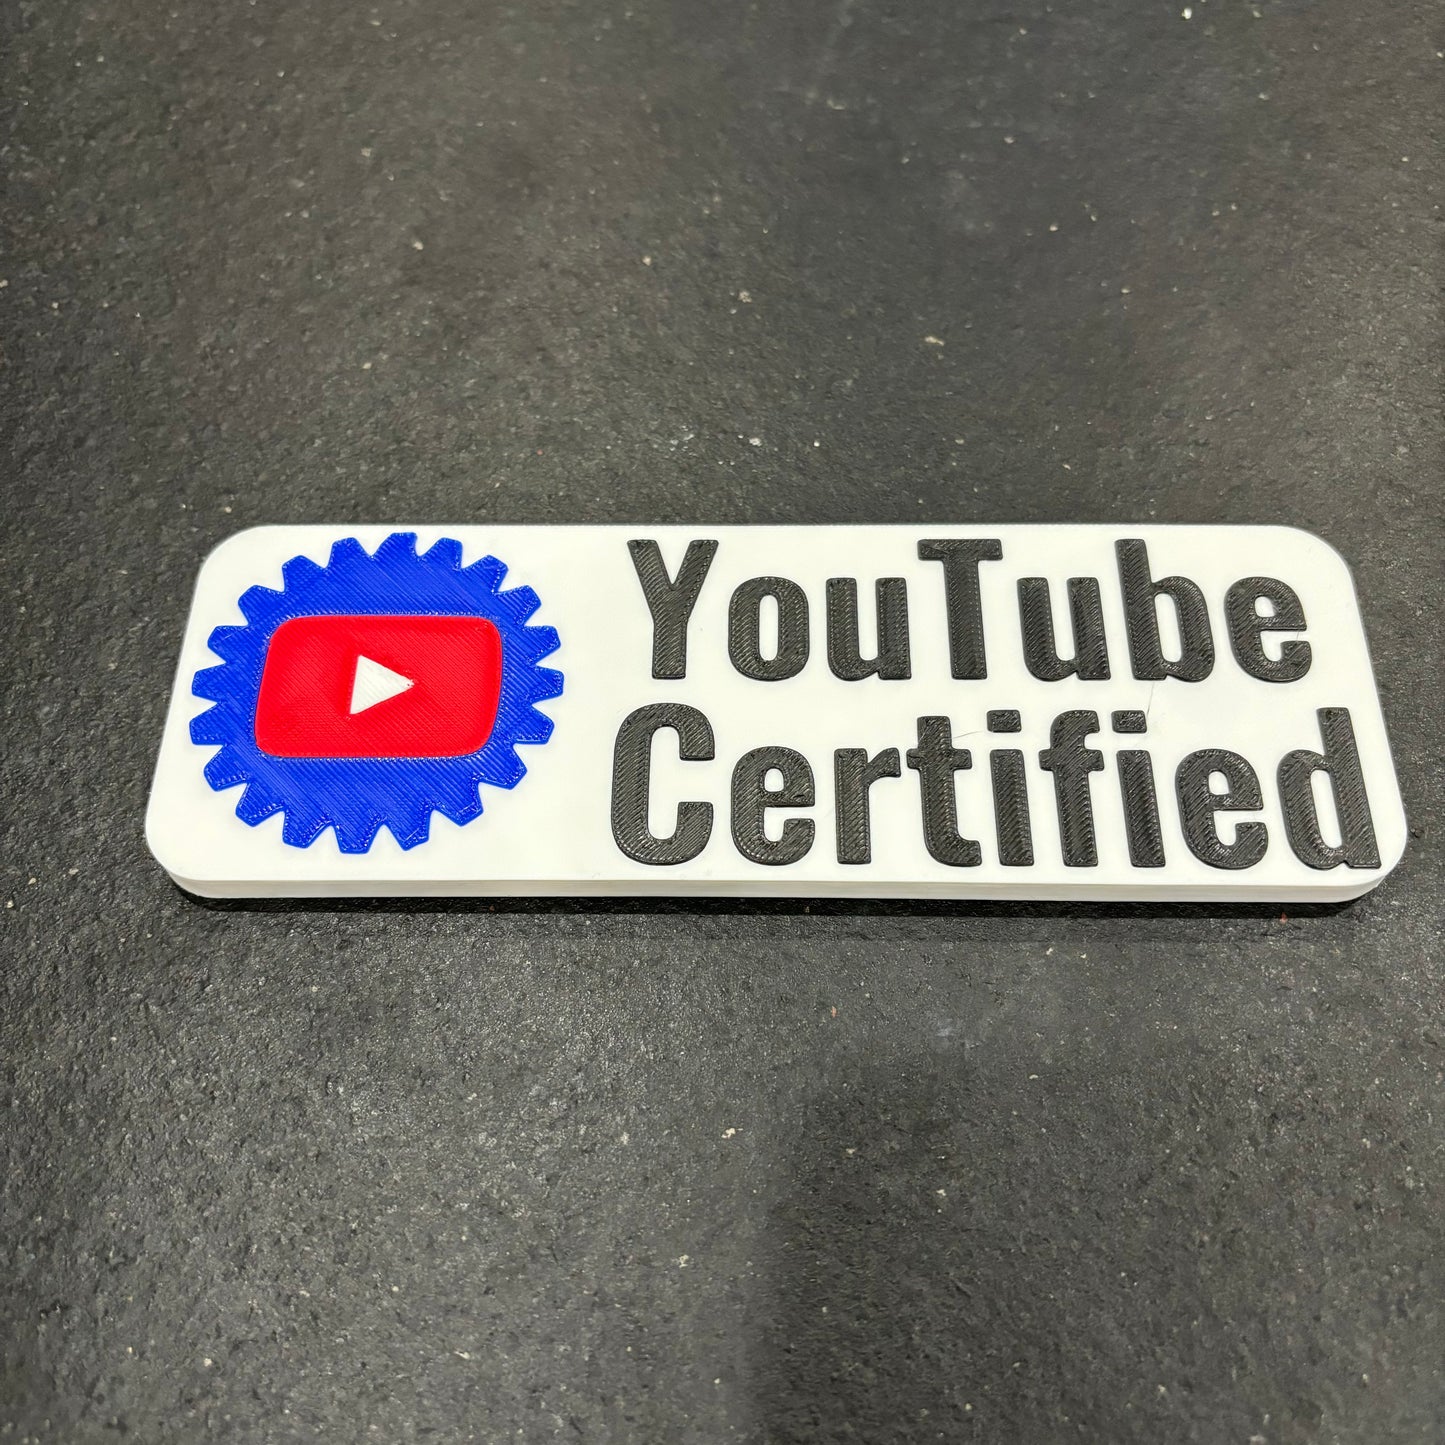 YouTube Certified Toolbox Badge